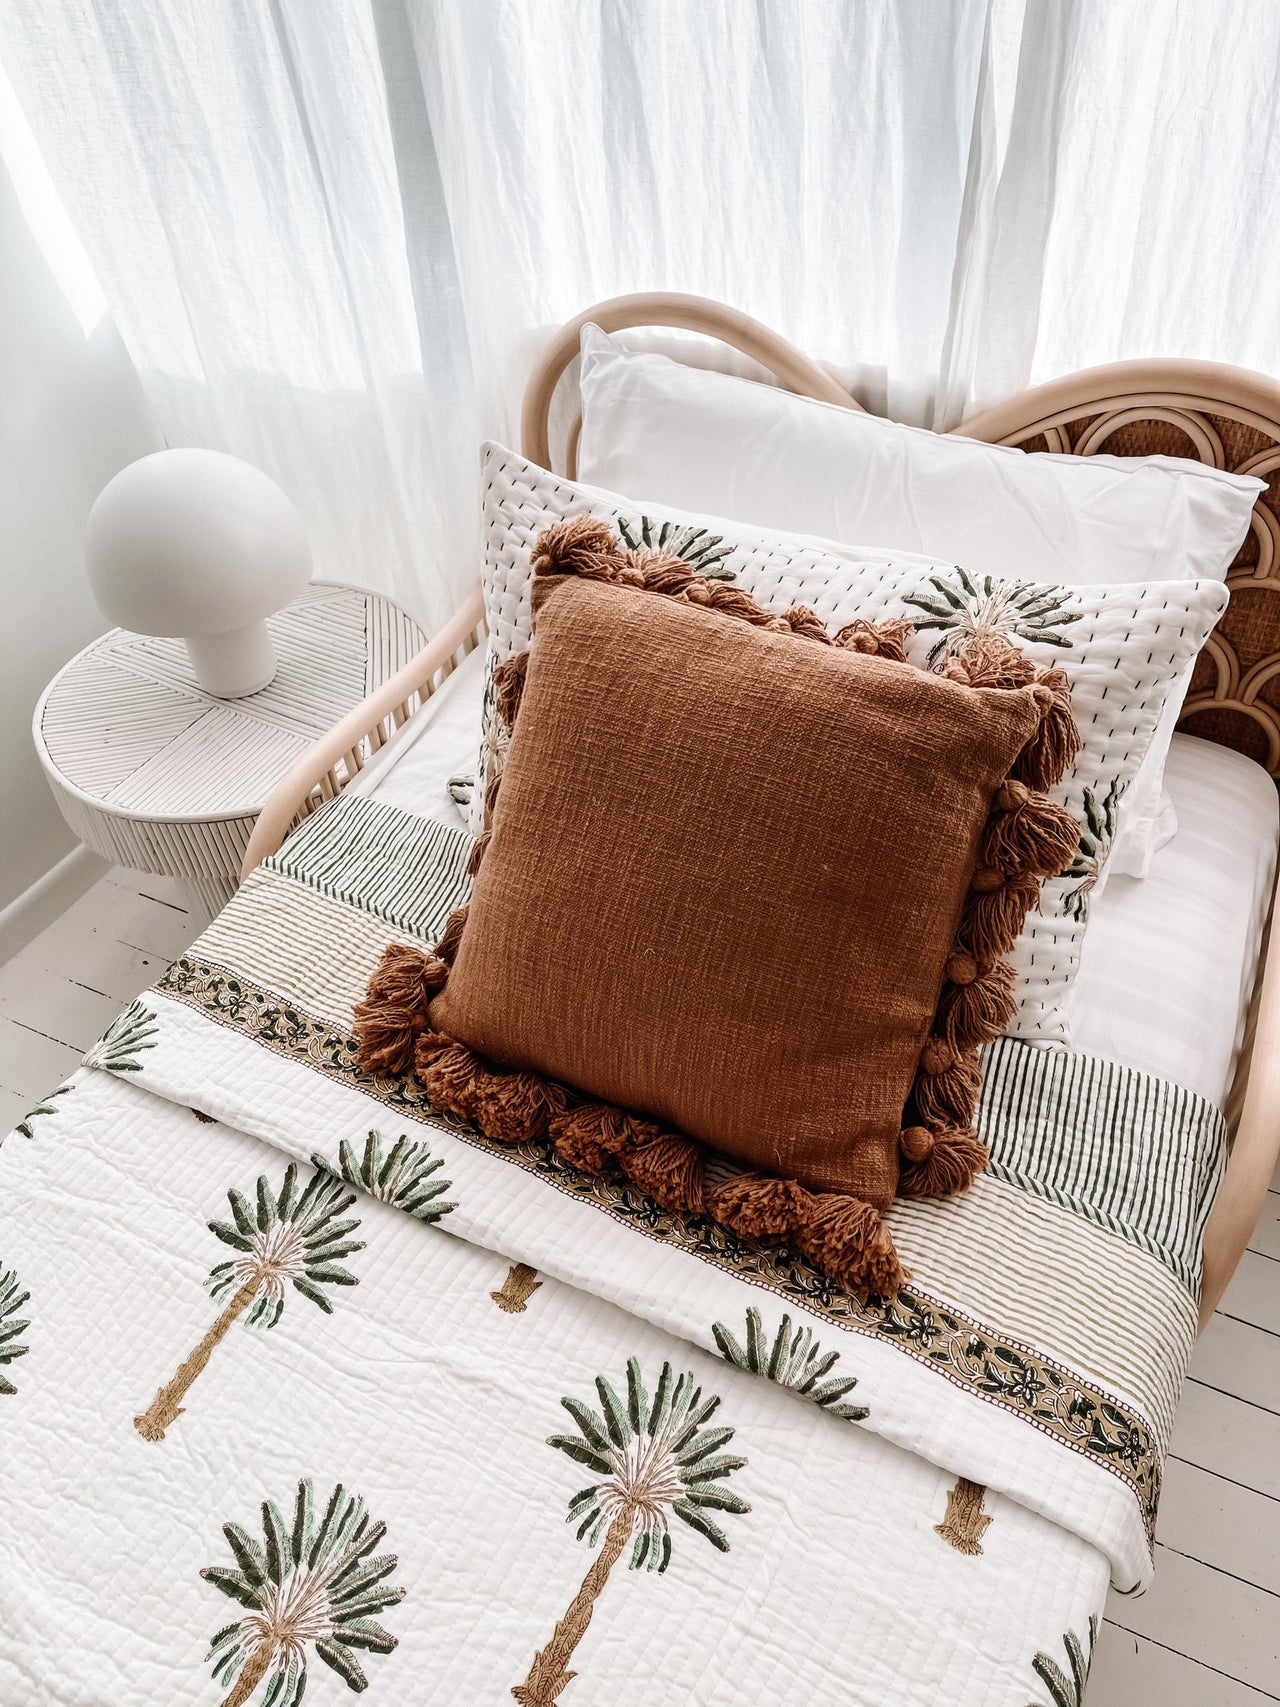 Single Kantha Quilt - Green Palm Springs